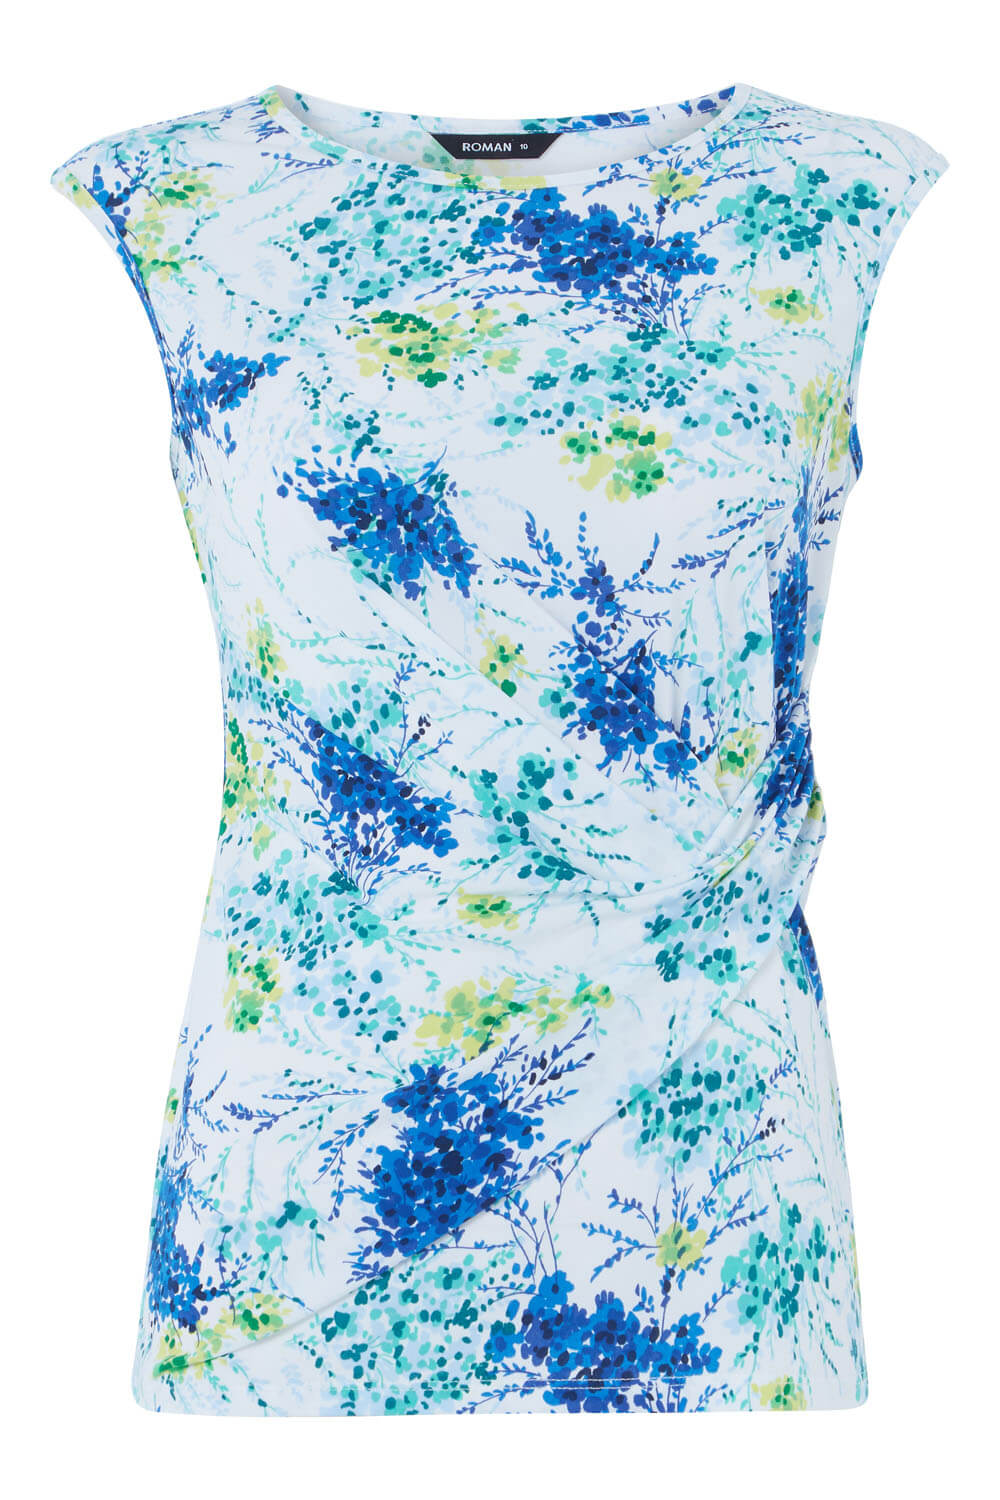 Blue Floral Side Pleat Top, Image 5 of 9